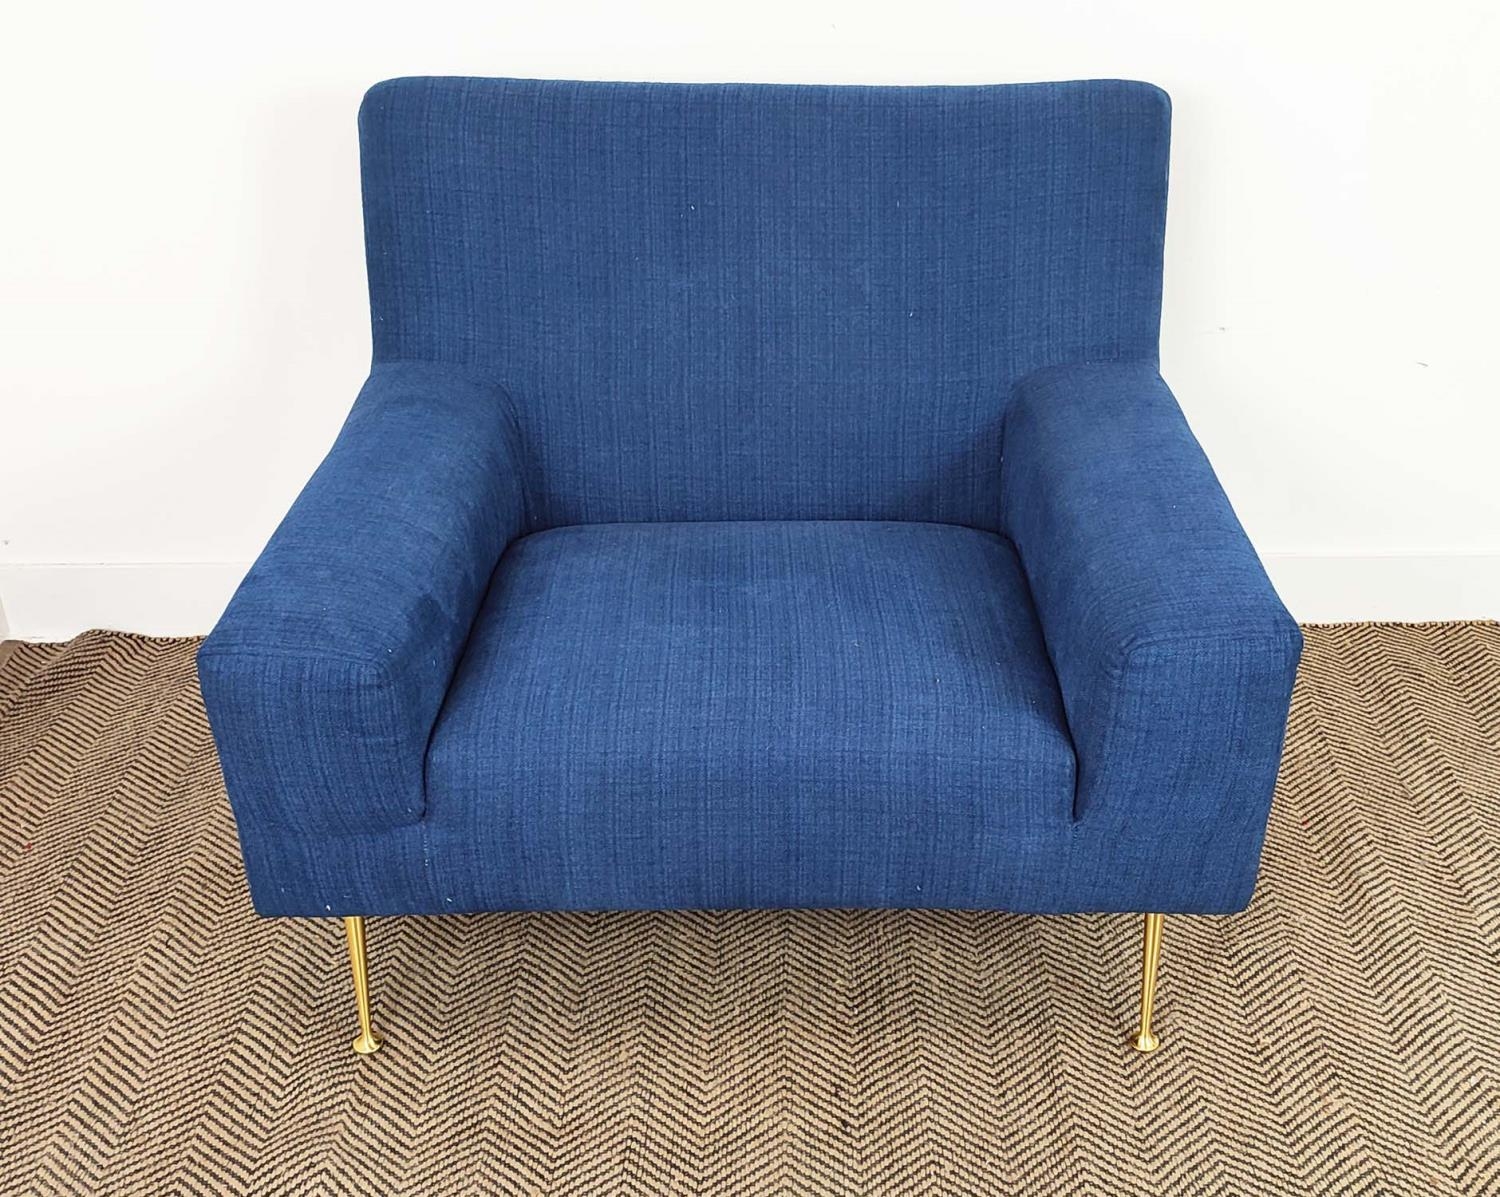 ARMCHAIR, blue chenille with brass legs, 85cm H x 97cm x 80cm. - Image 2 of 10